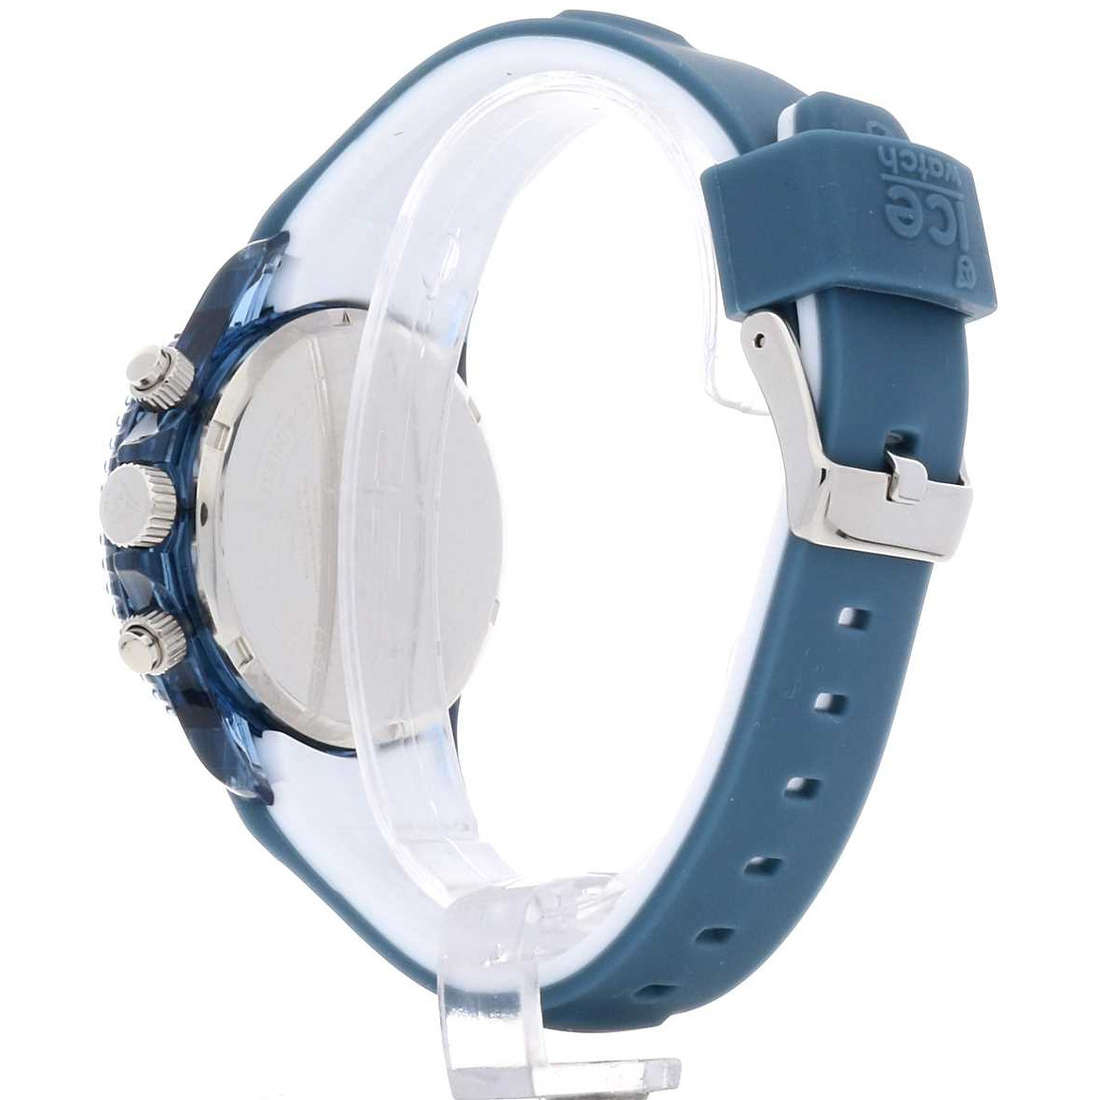 Offres montres unisex ICE WATCH IC.AQ.CH.BST.U.S15